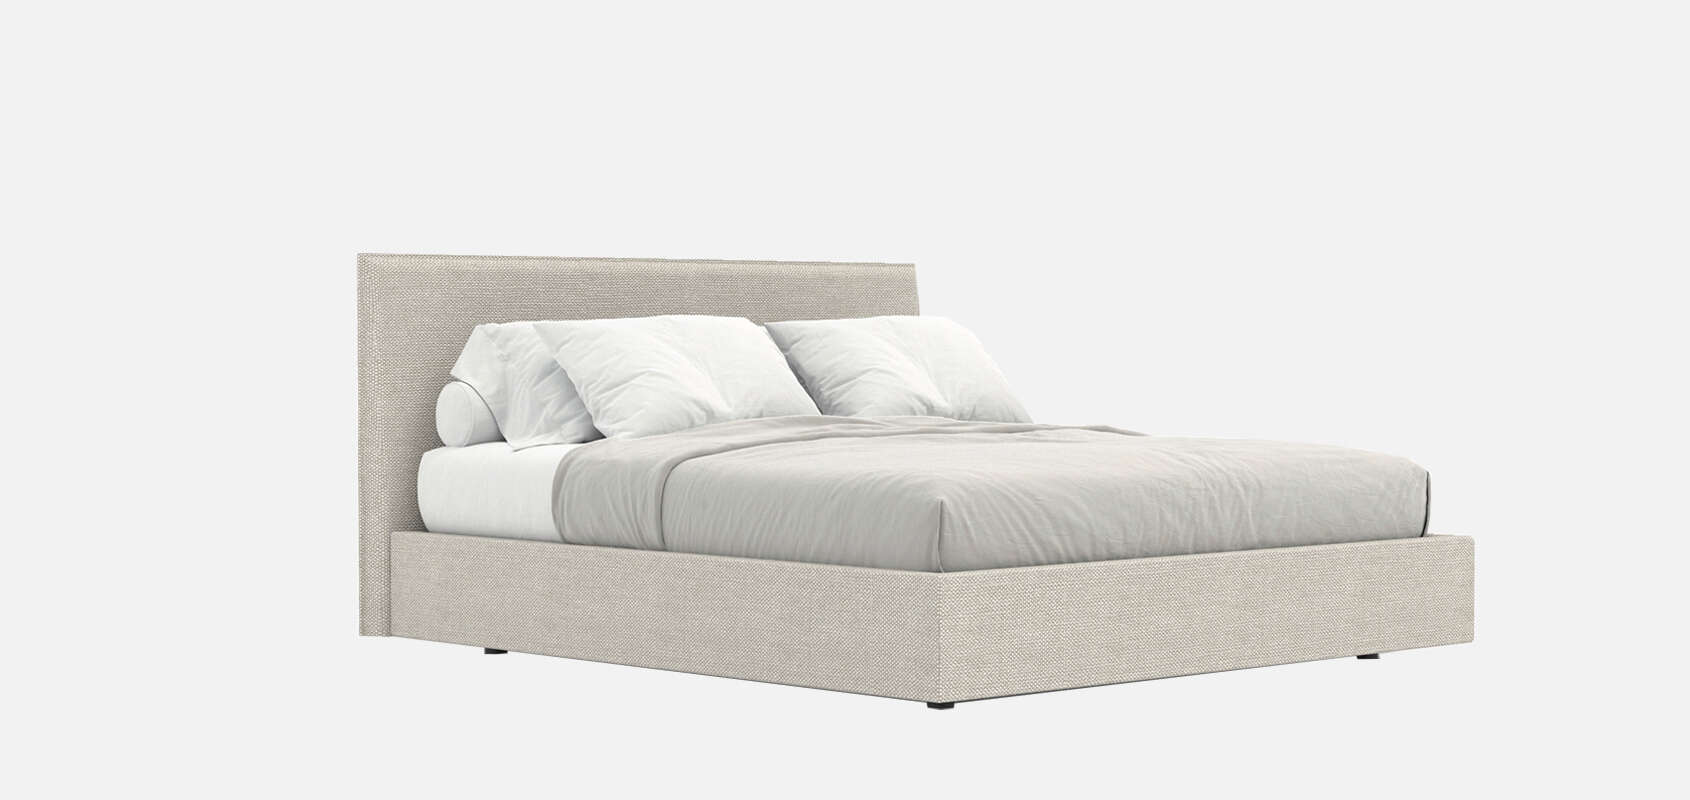 Silence Bed Extended